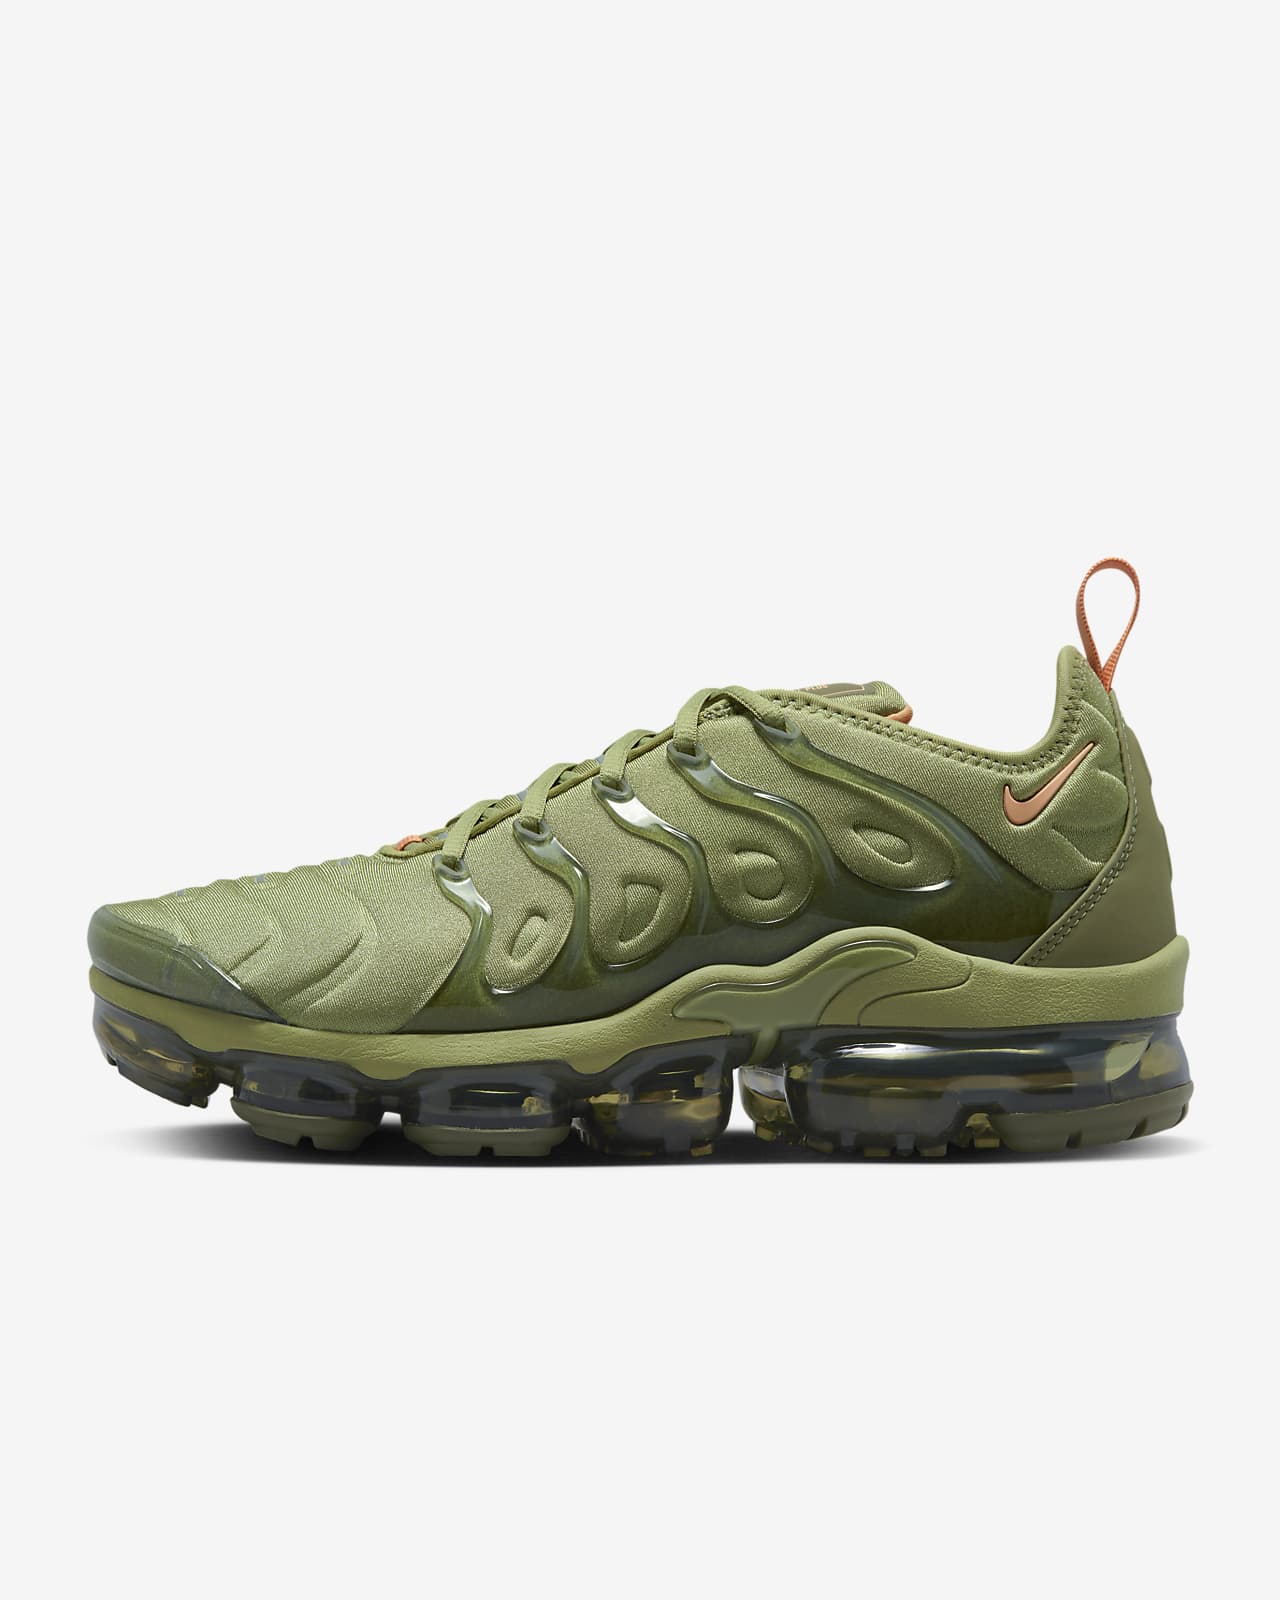 nike vapormax sandals price south africa